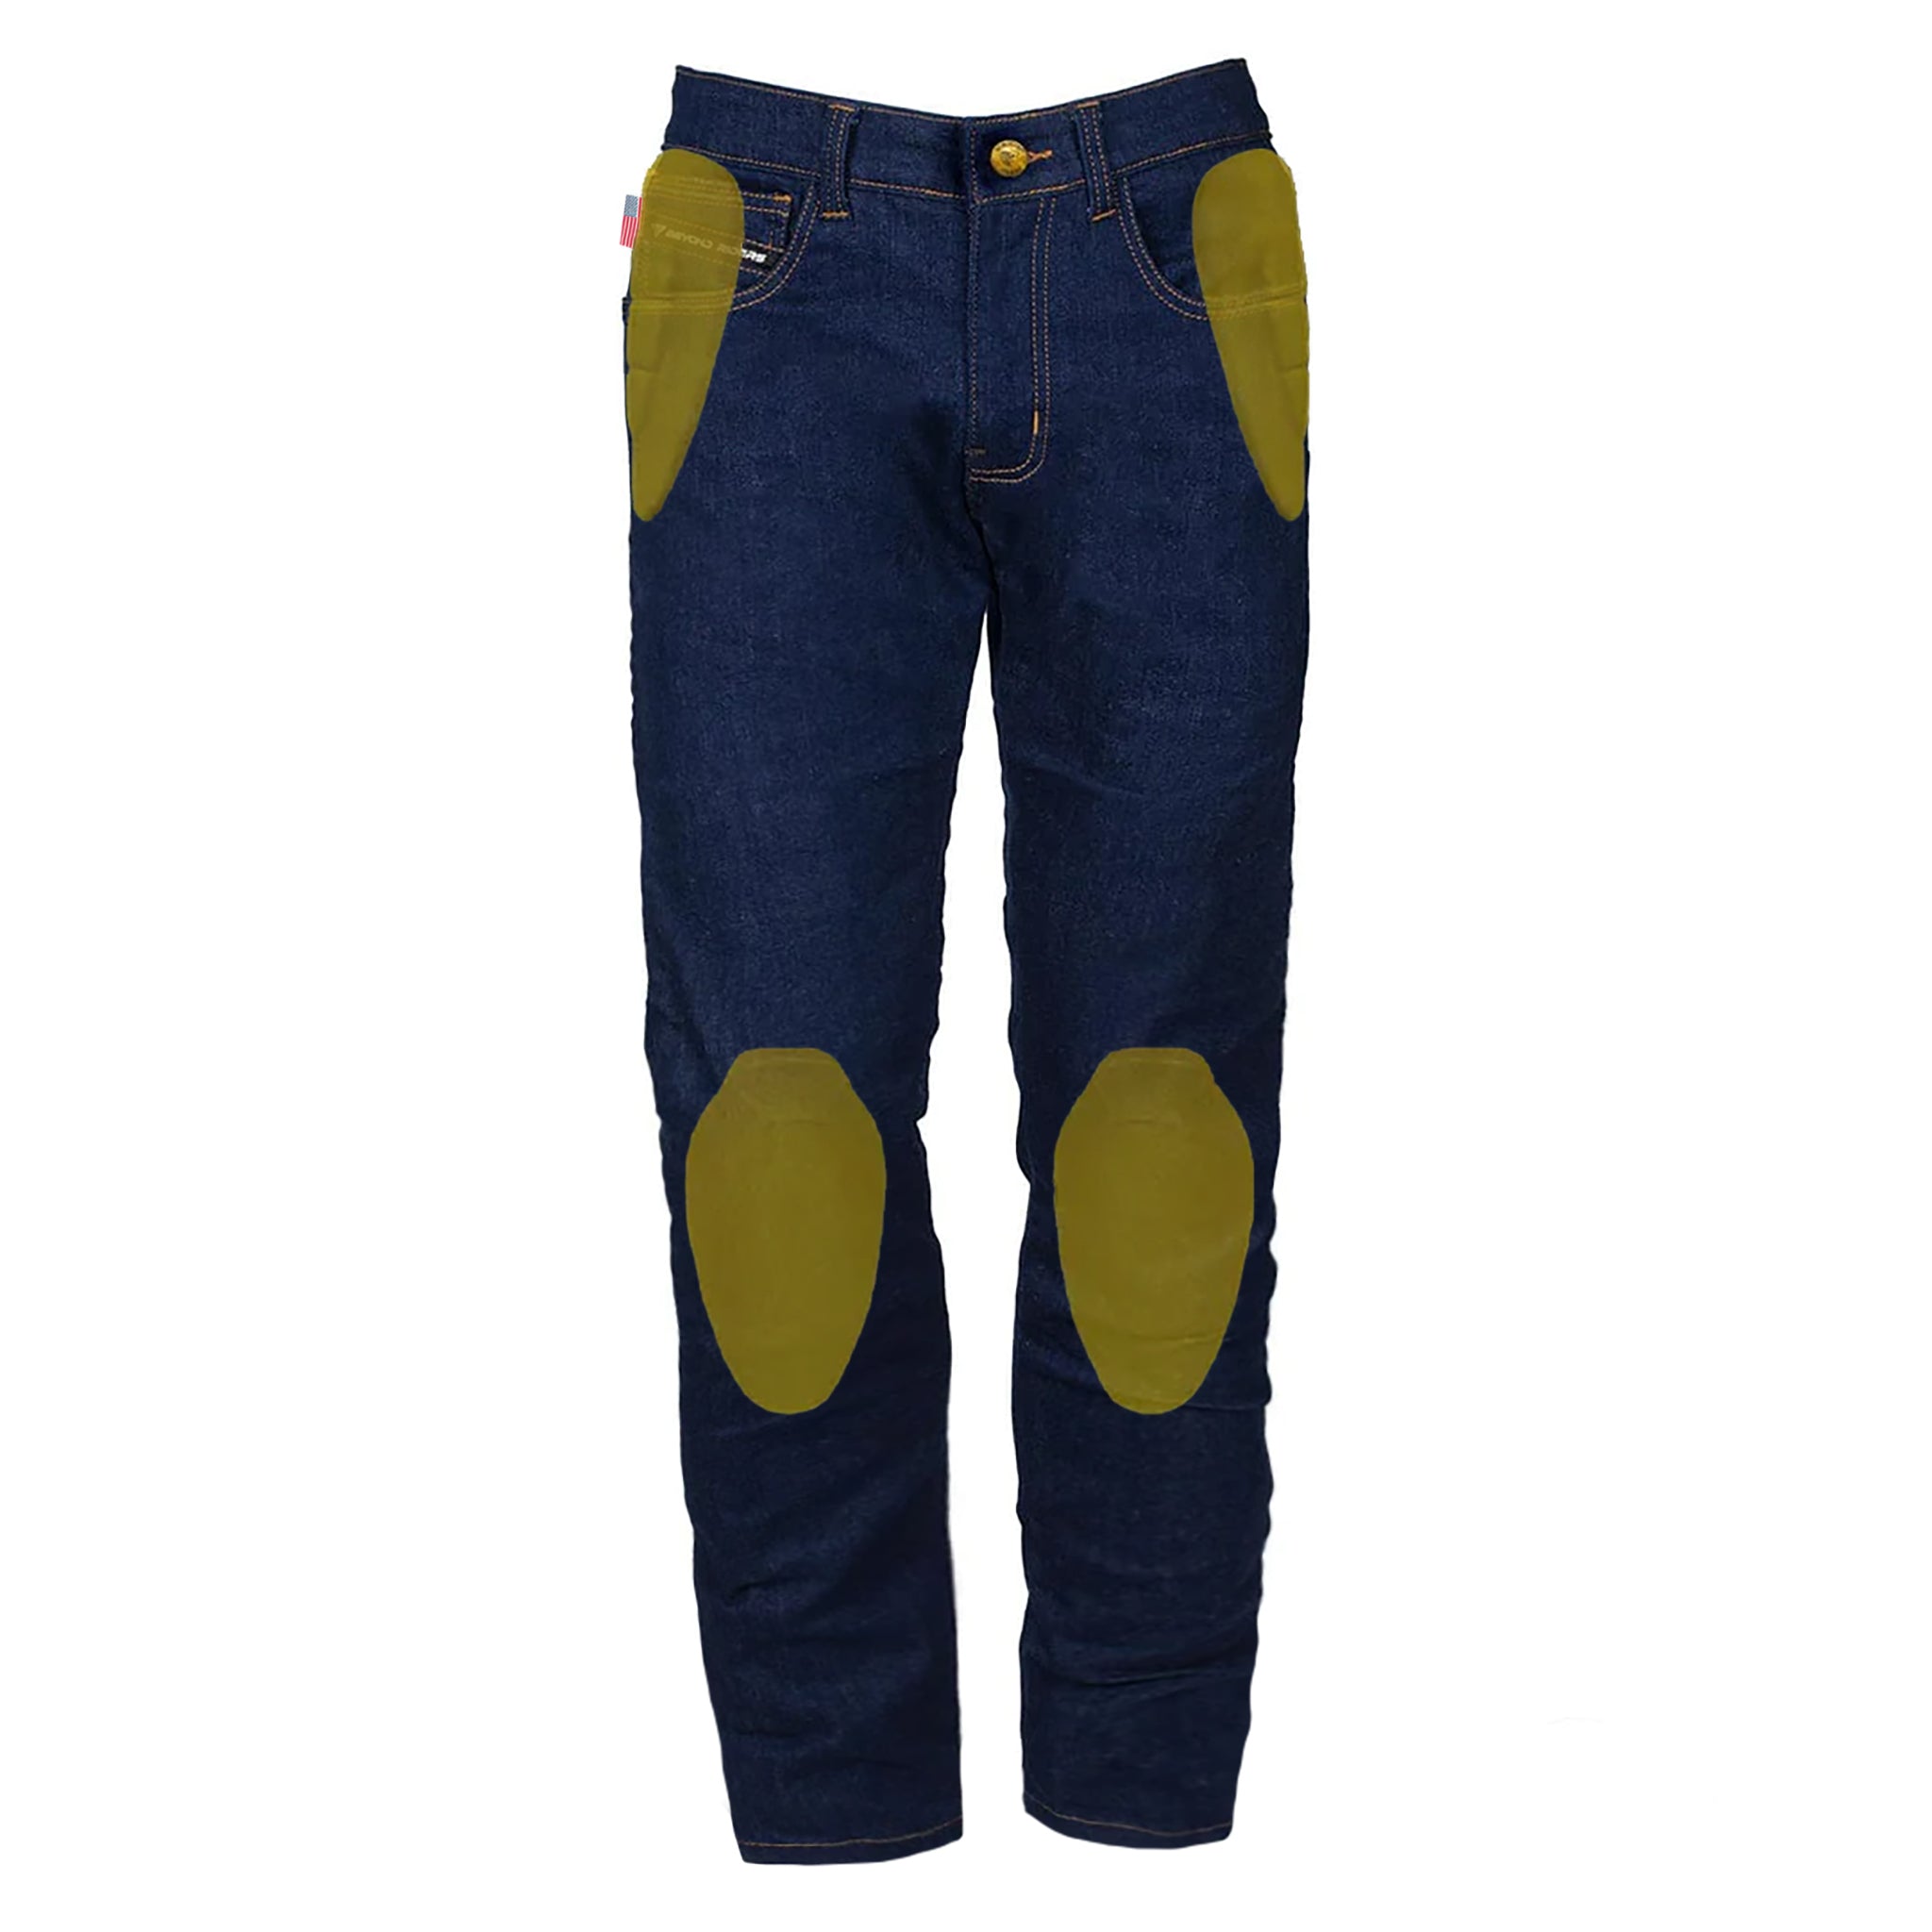 Loose Fit Protective Jeans - Blue with Pads